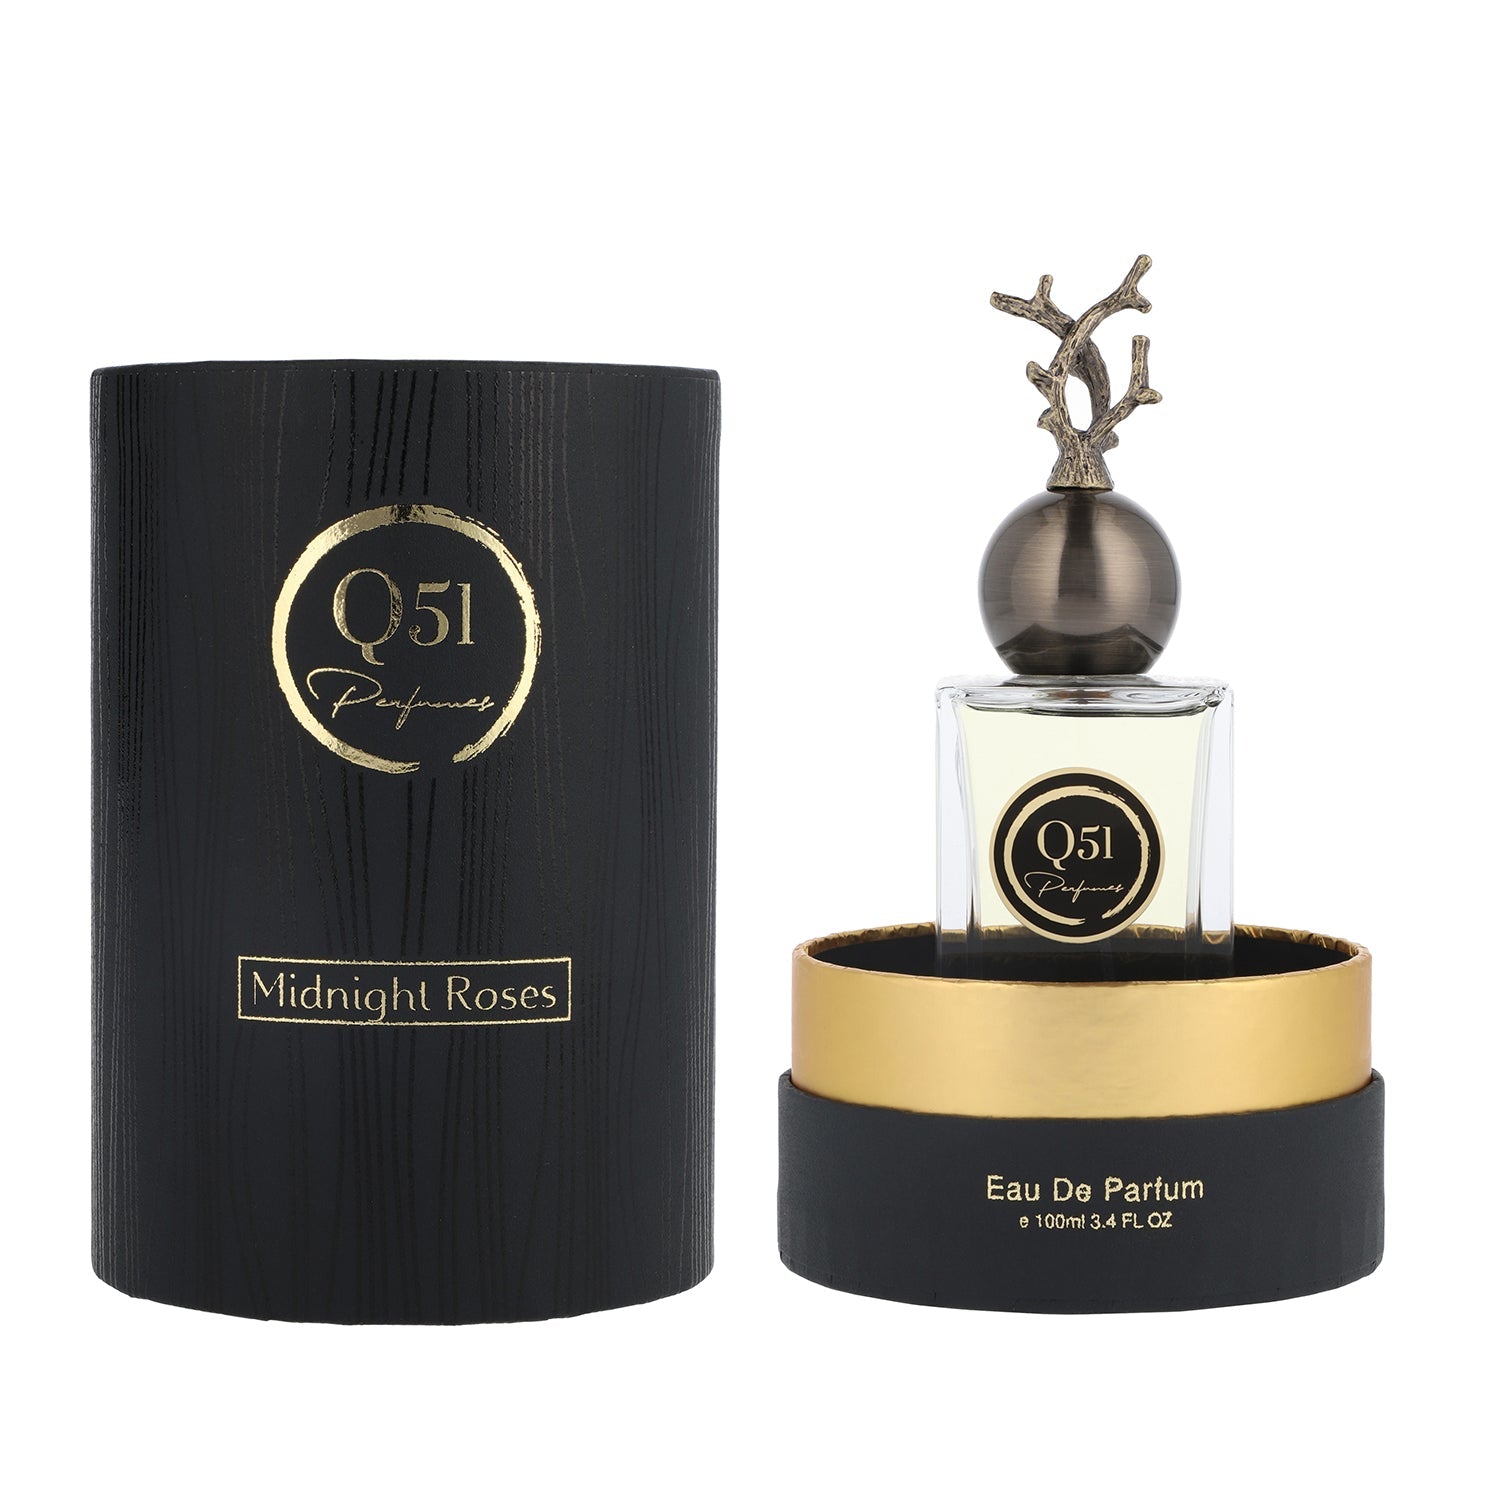 Midnight Roses EDP 100 ml from Q51 Perfumes